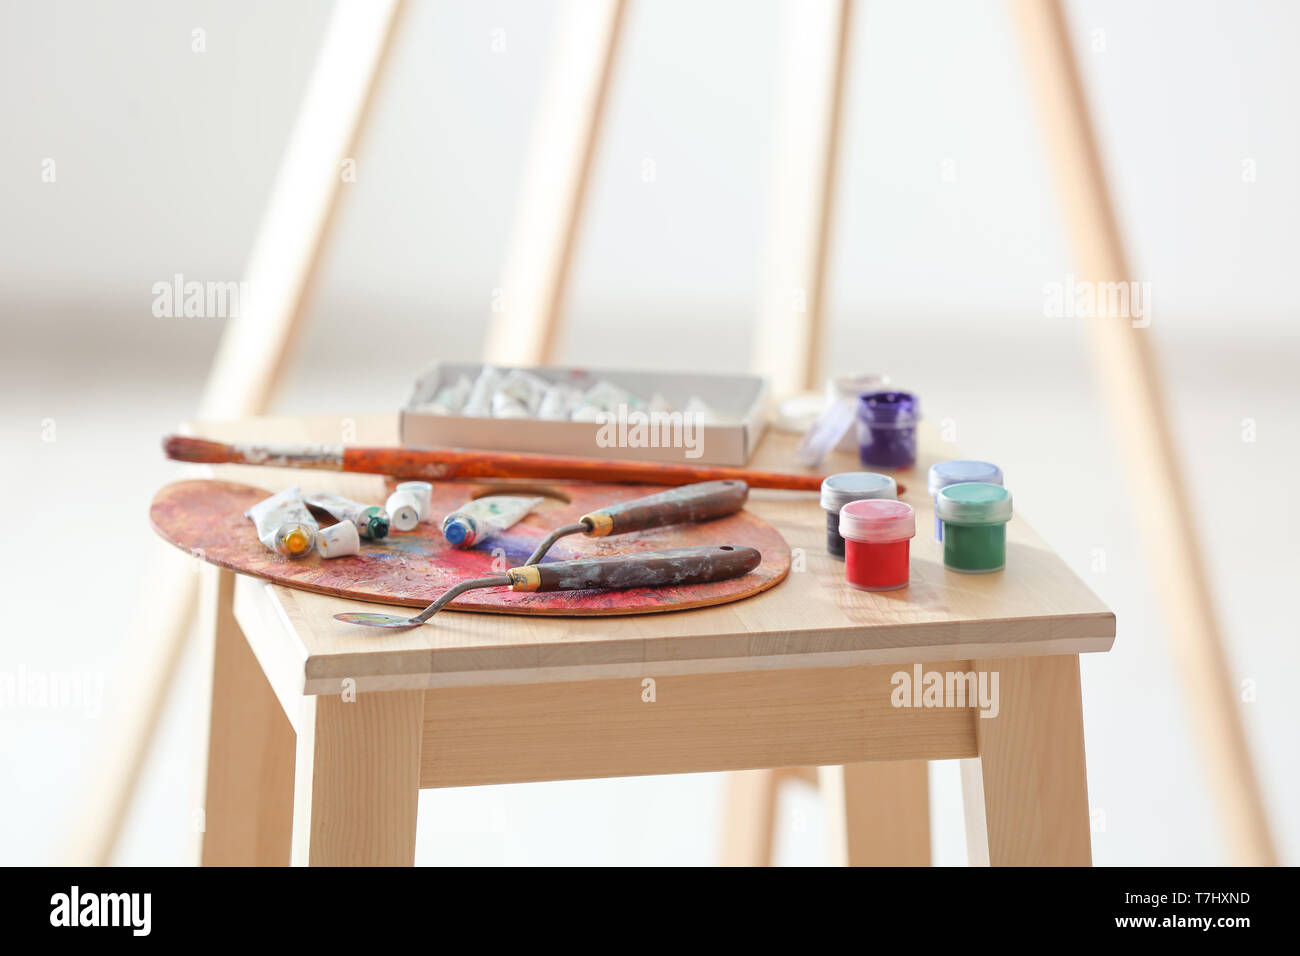 Tools and paints of professional artist on wooden chair Stock Photo